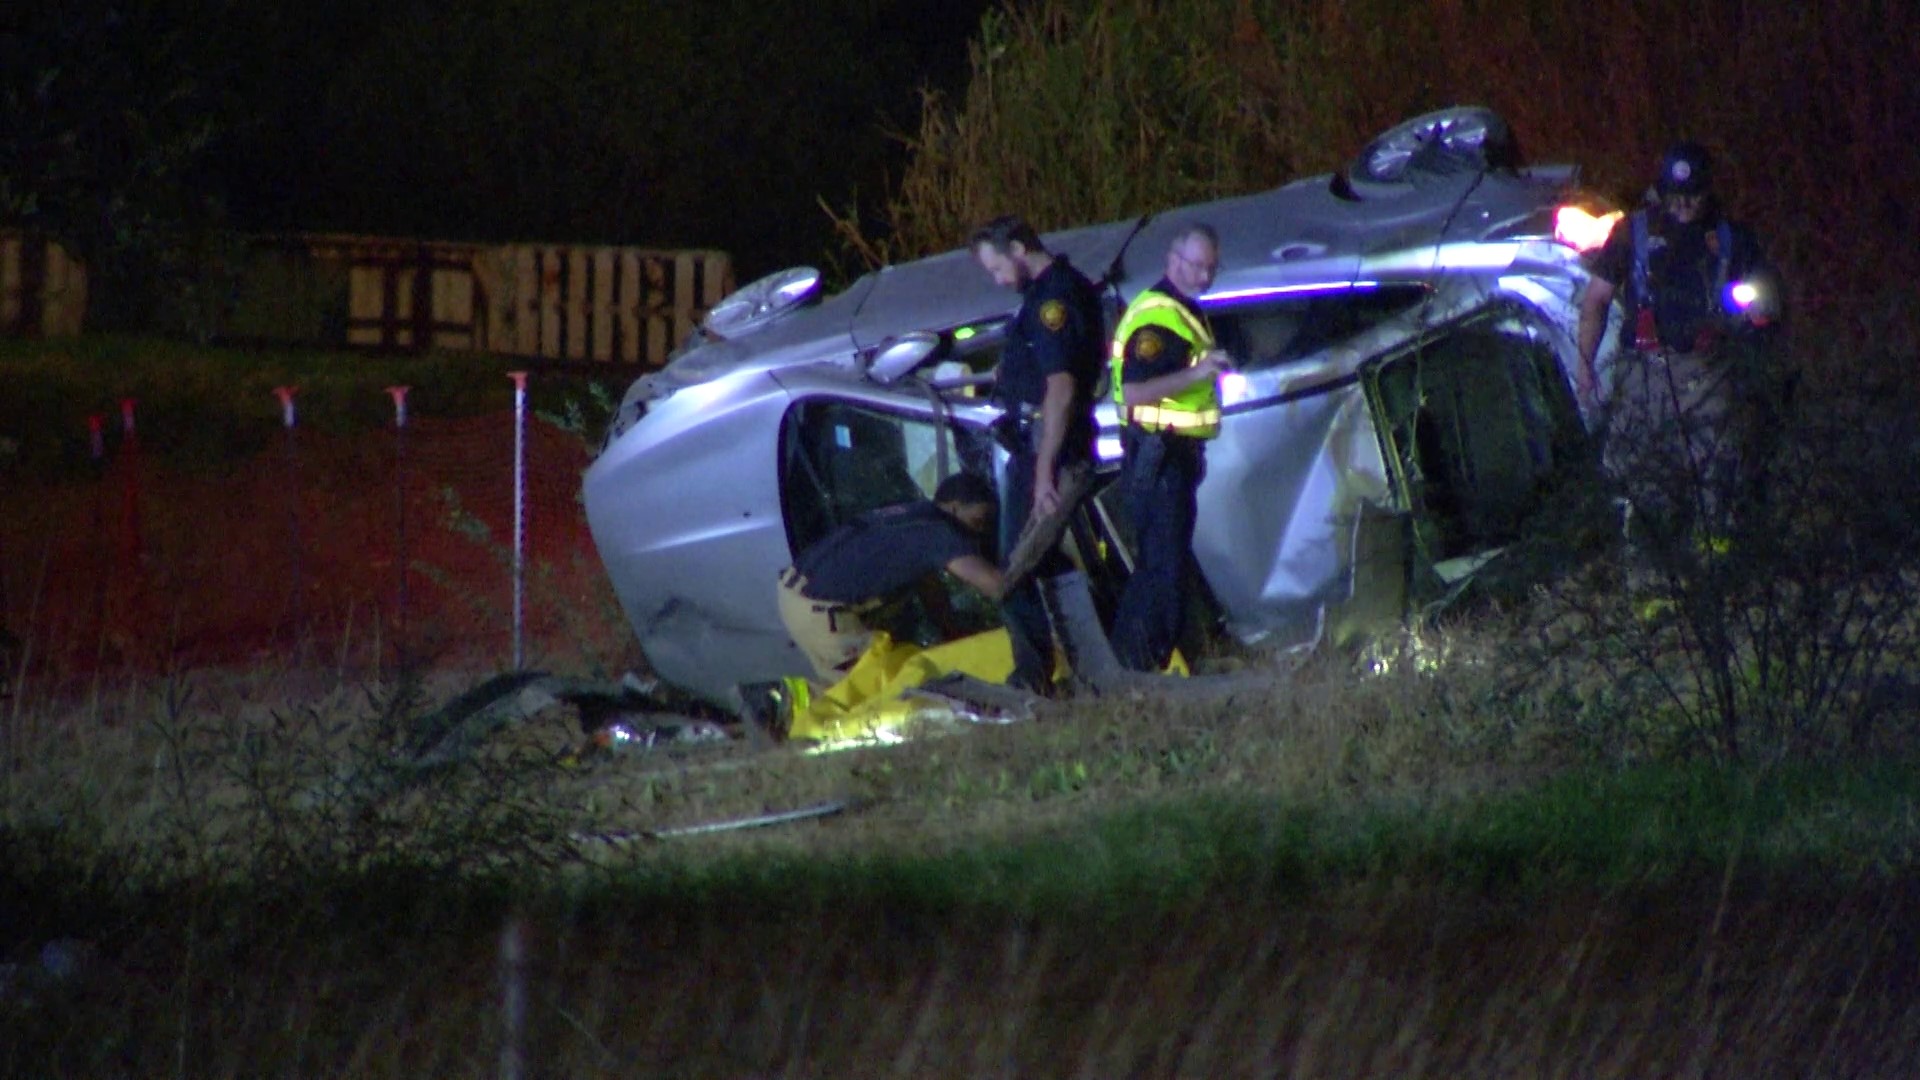 Two people ejected from rollover crash, one dead at scene